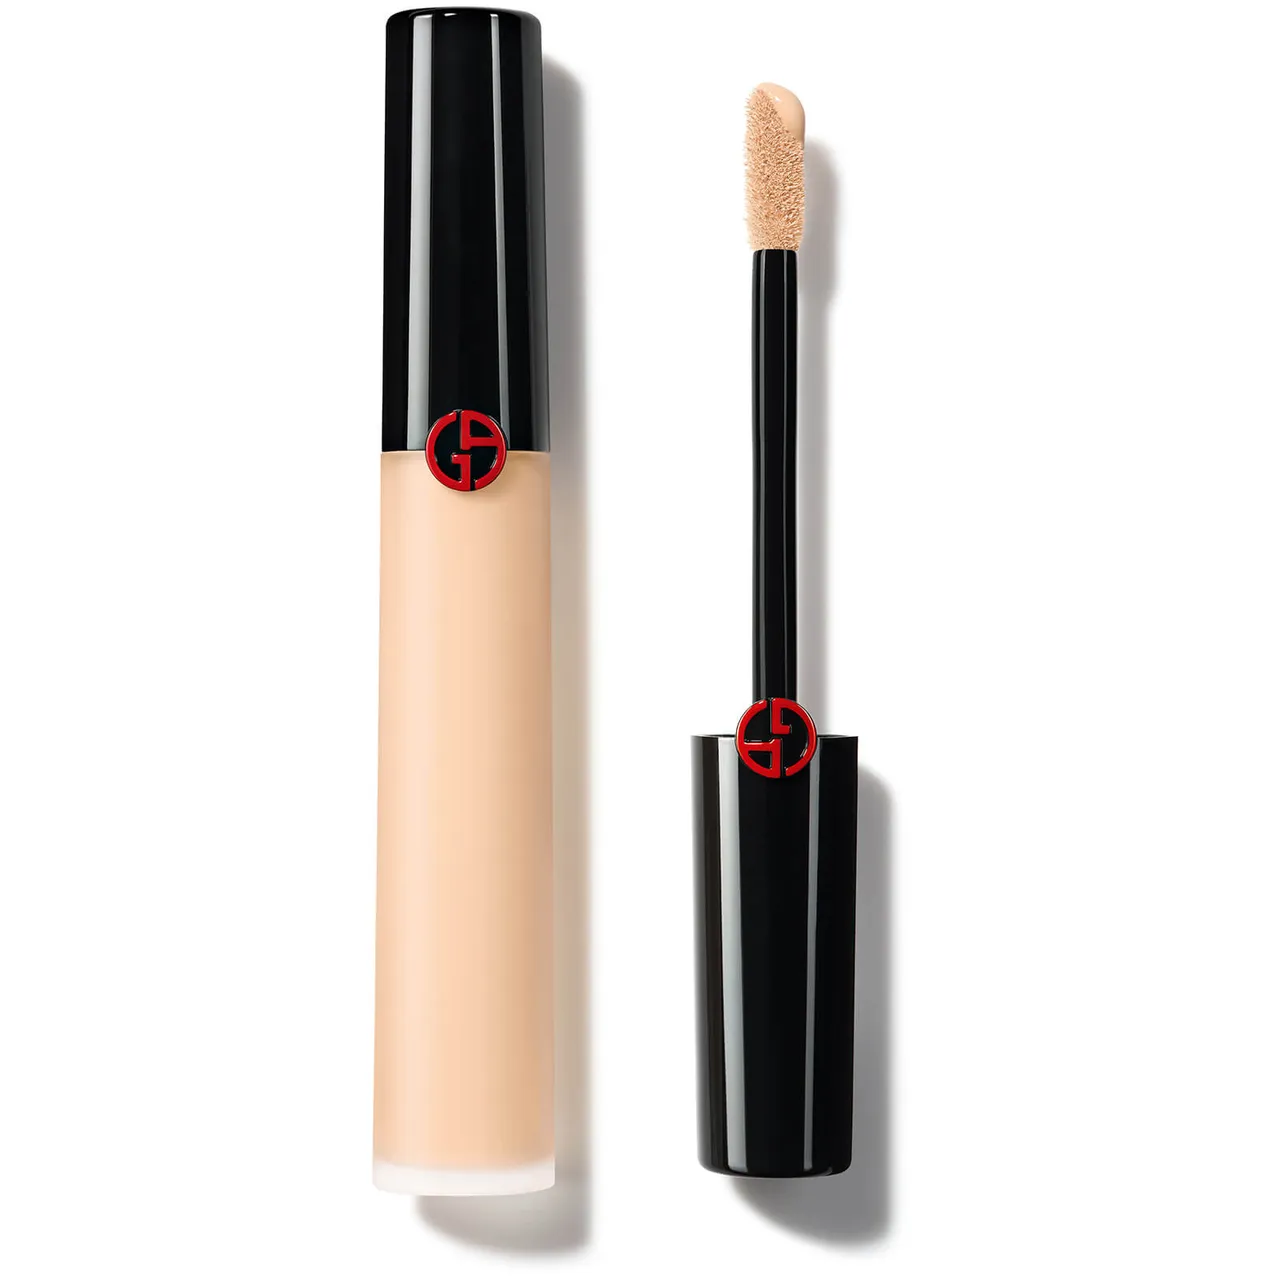 Armani Power Fabric Concealer 30g (Various Shades) - 1.5